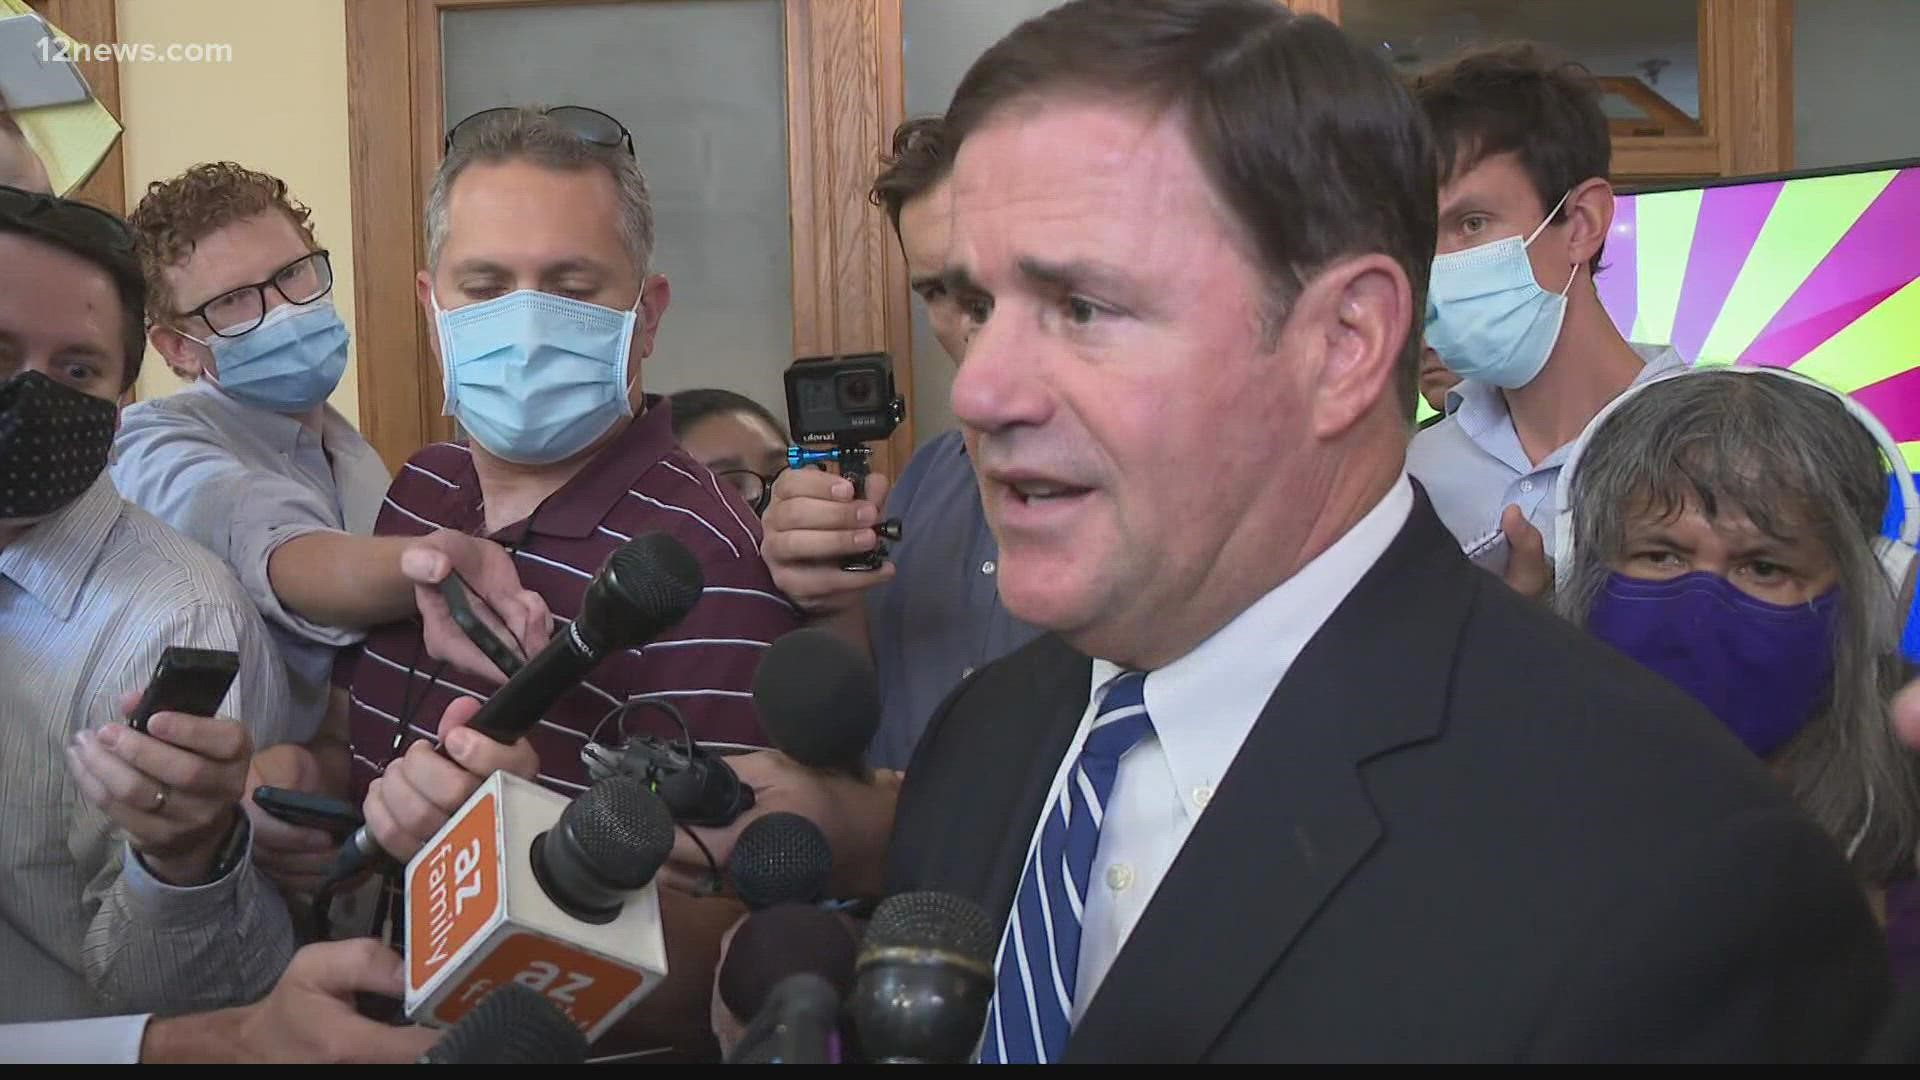 Gov. Doug Ducey announced Friday he was filing a lawsuit against the U.S. Treasury Department over a dispute regarding COVID-19 relief funds.